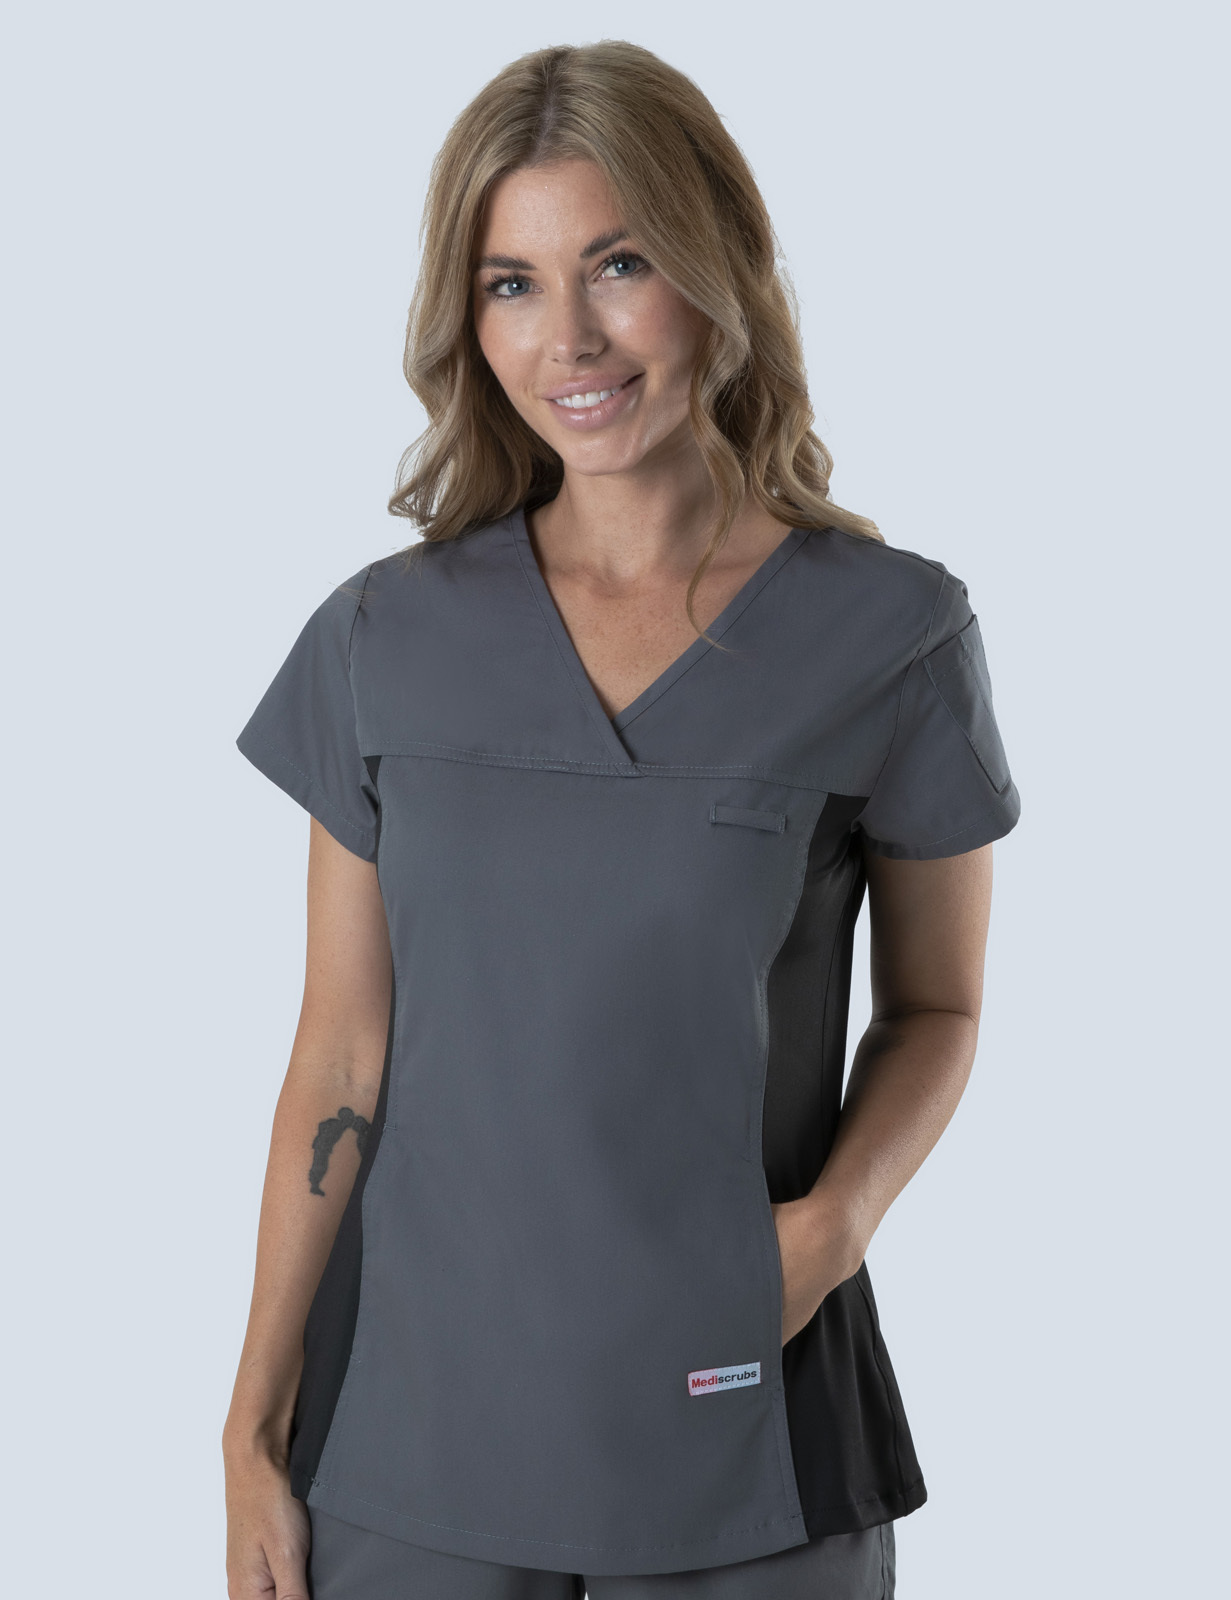 Women's Fit Solid Scrub Top With Spandex Panel - Steel Grey - XX Small